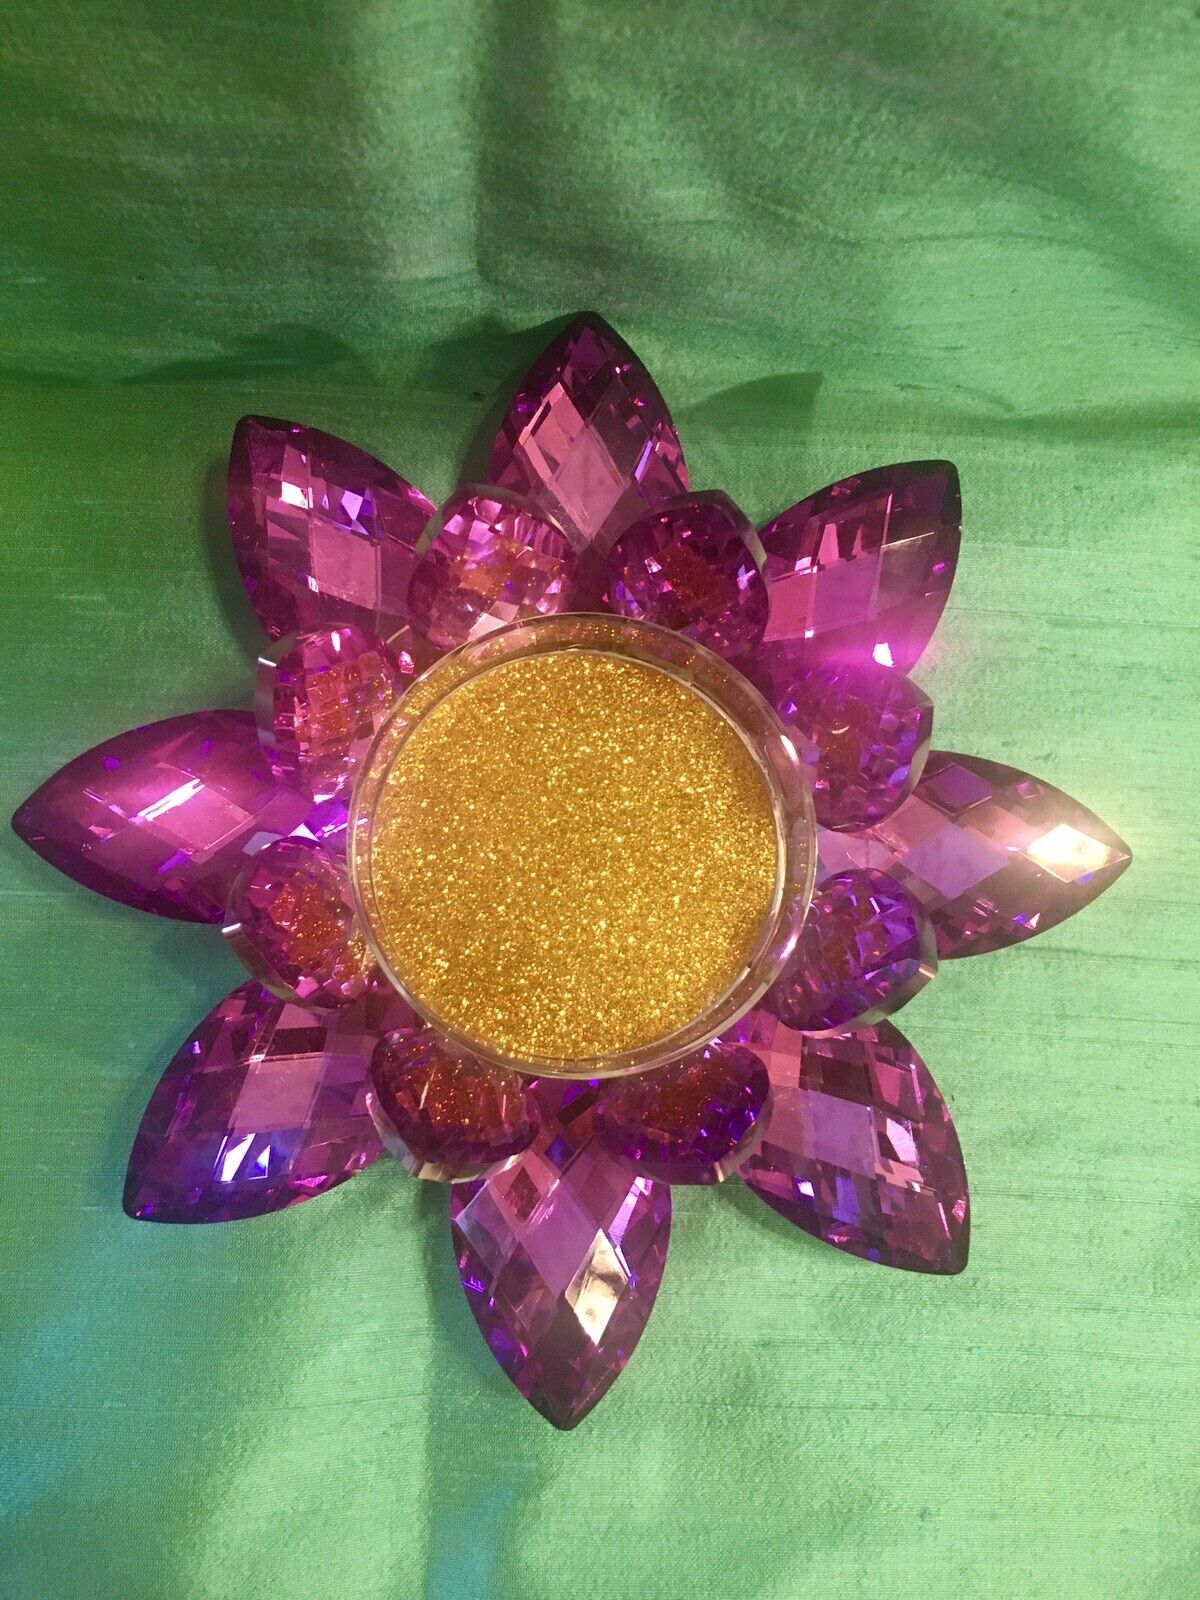 Rare purple crystal water lily pad lotus flower candle holder extra large 8”